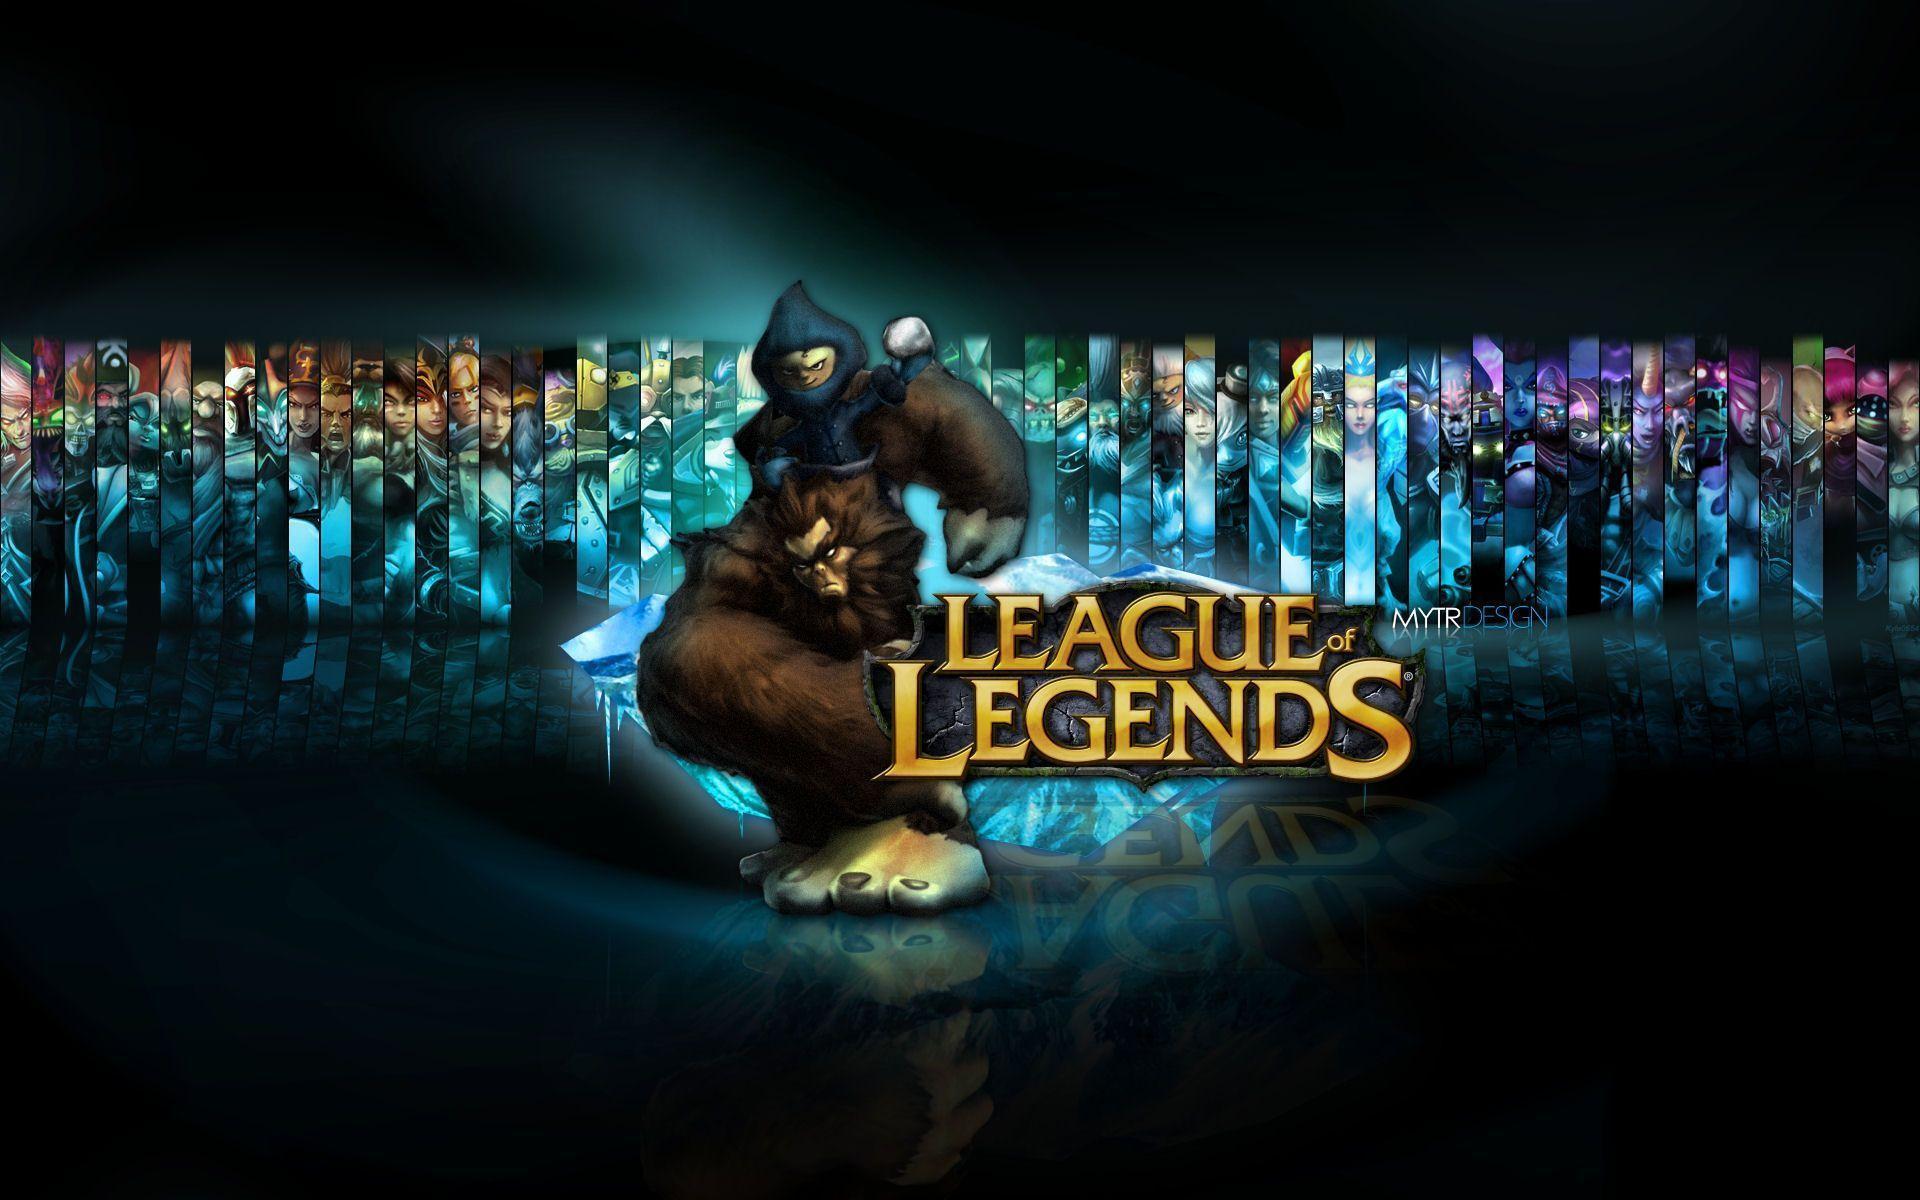 League of legends Cover Wallpaper HD. Download Background